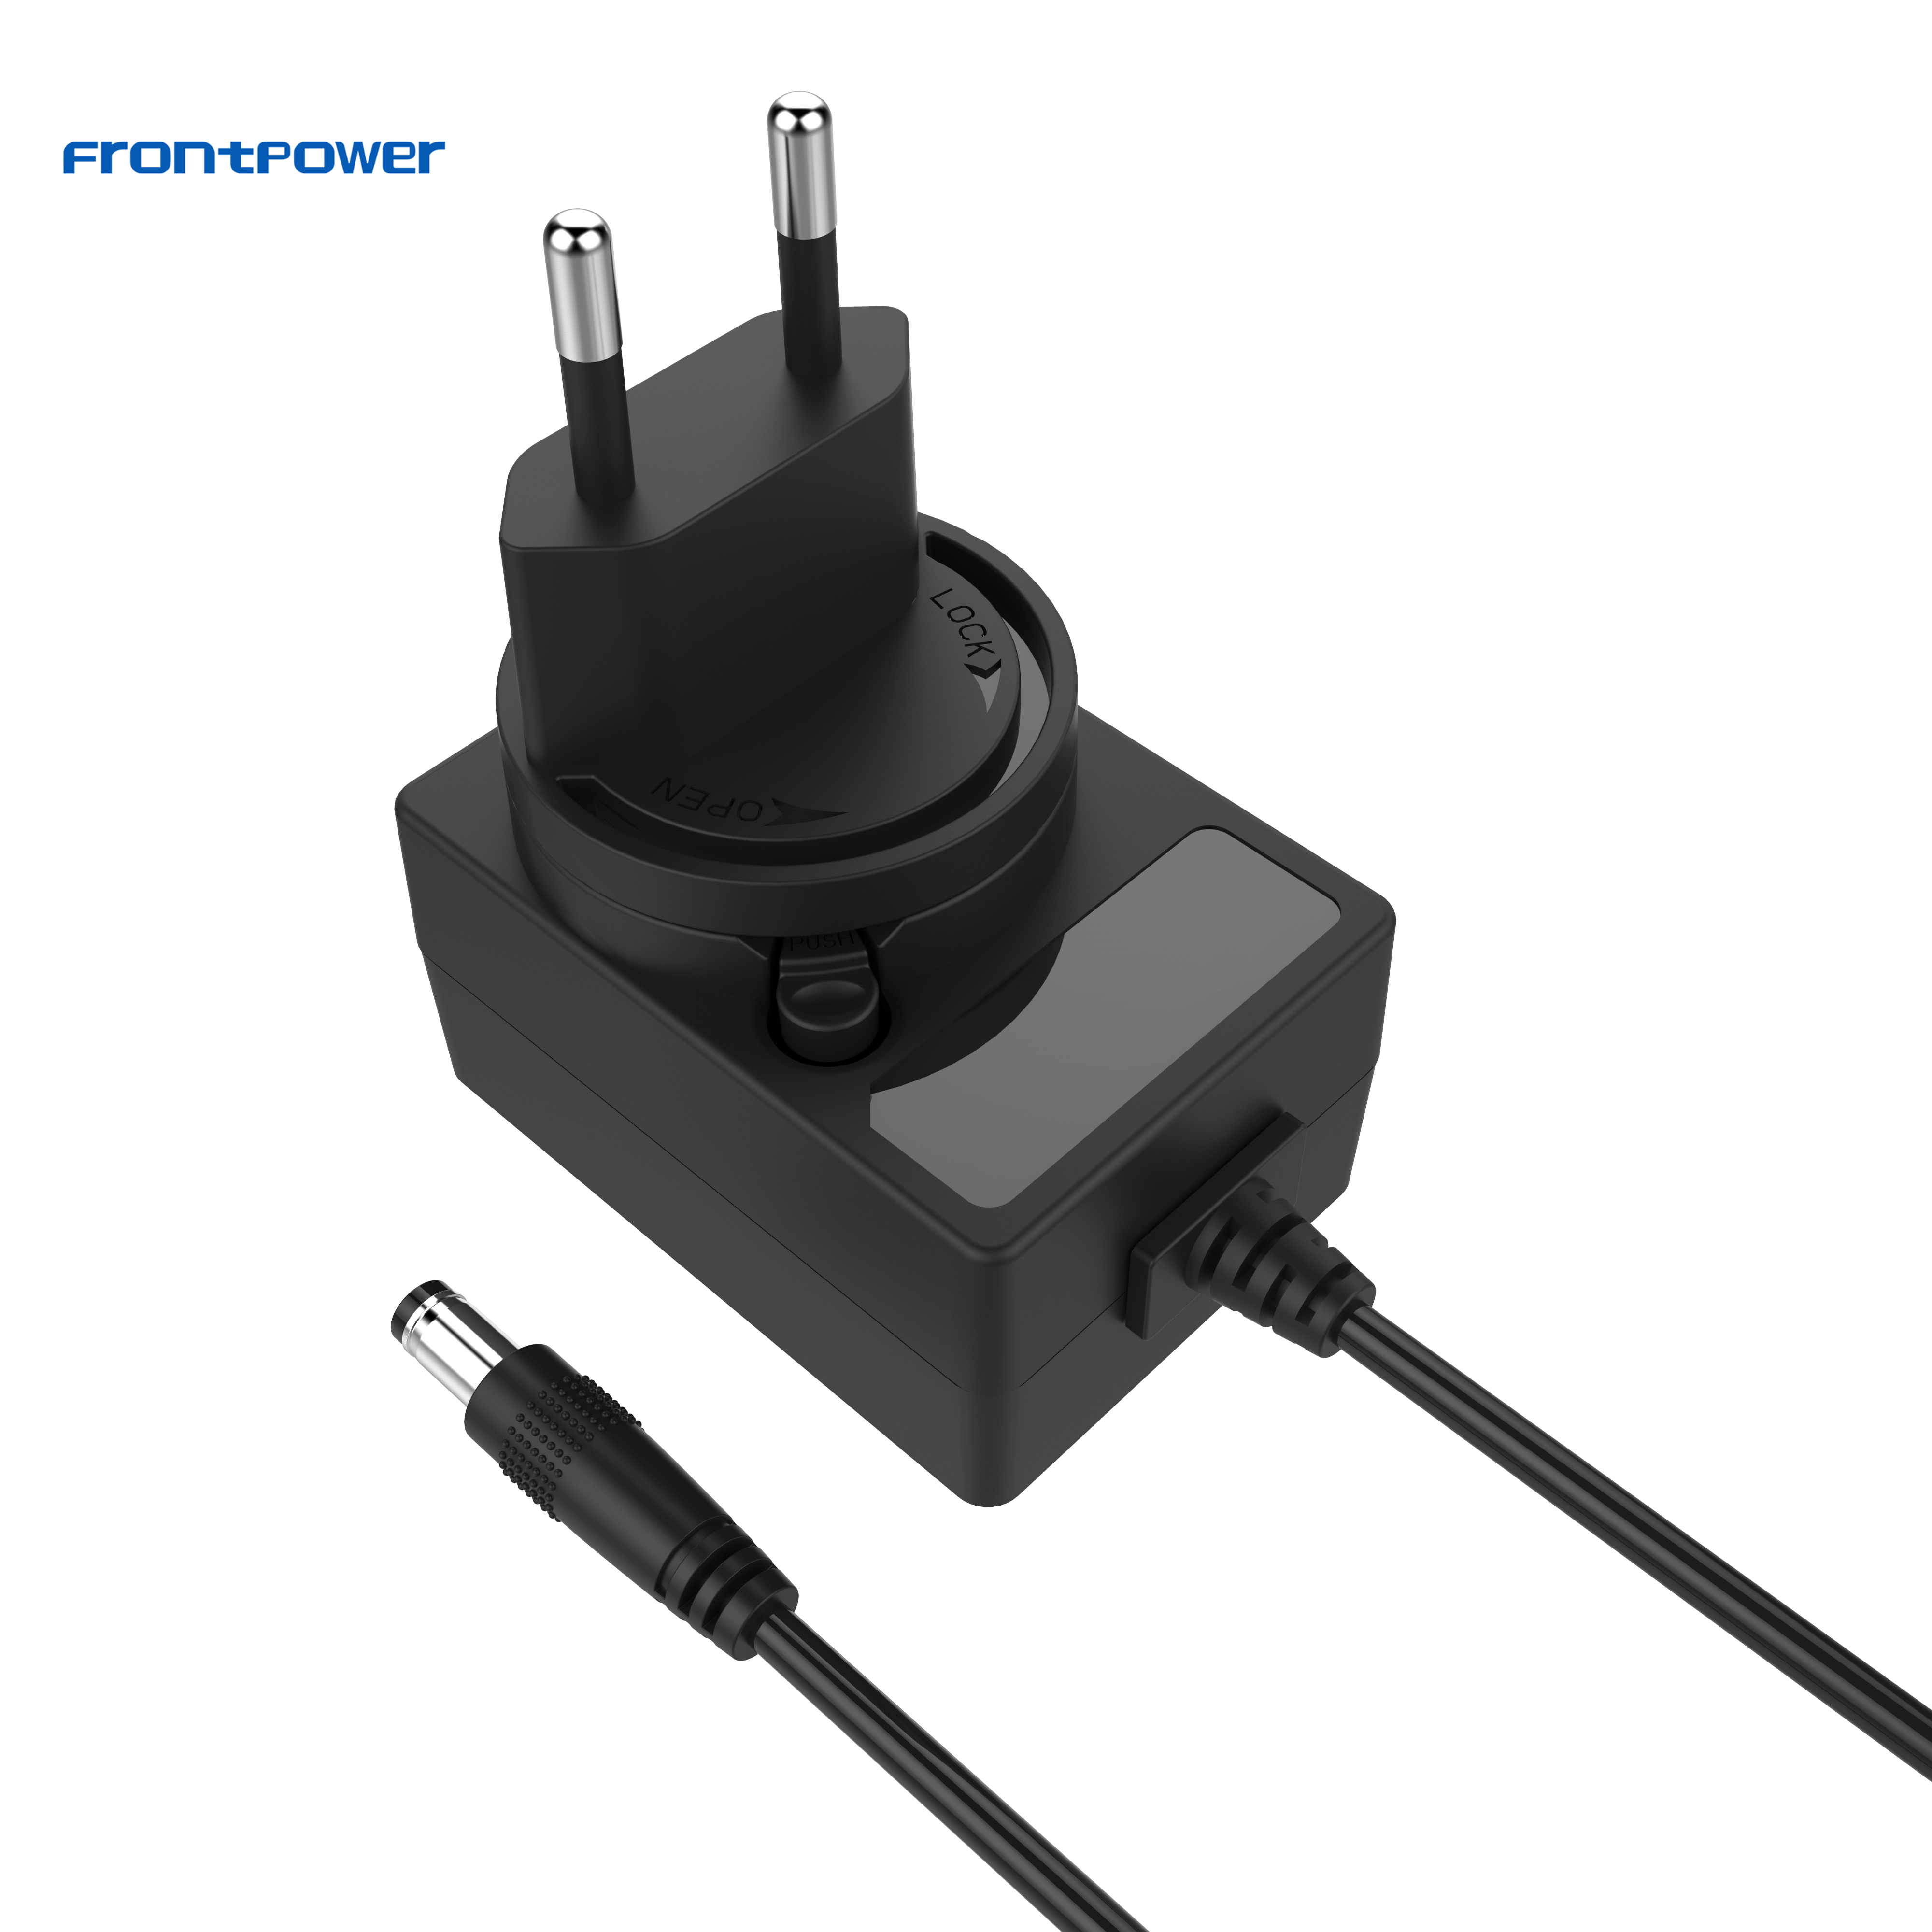 5V 6V 8V 9V 12V 24V 0.5A 1A 1.5A 2A 2.5A 3A US EU UK AU Plug ACDC Power Adapter Supply for CCTV